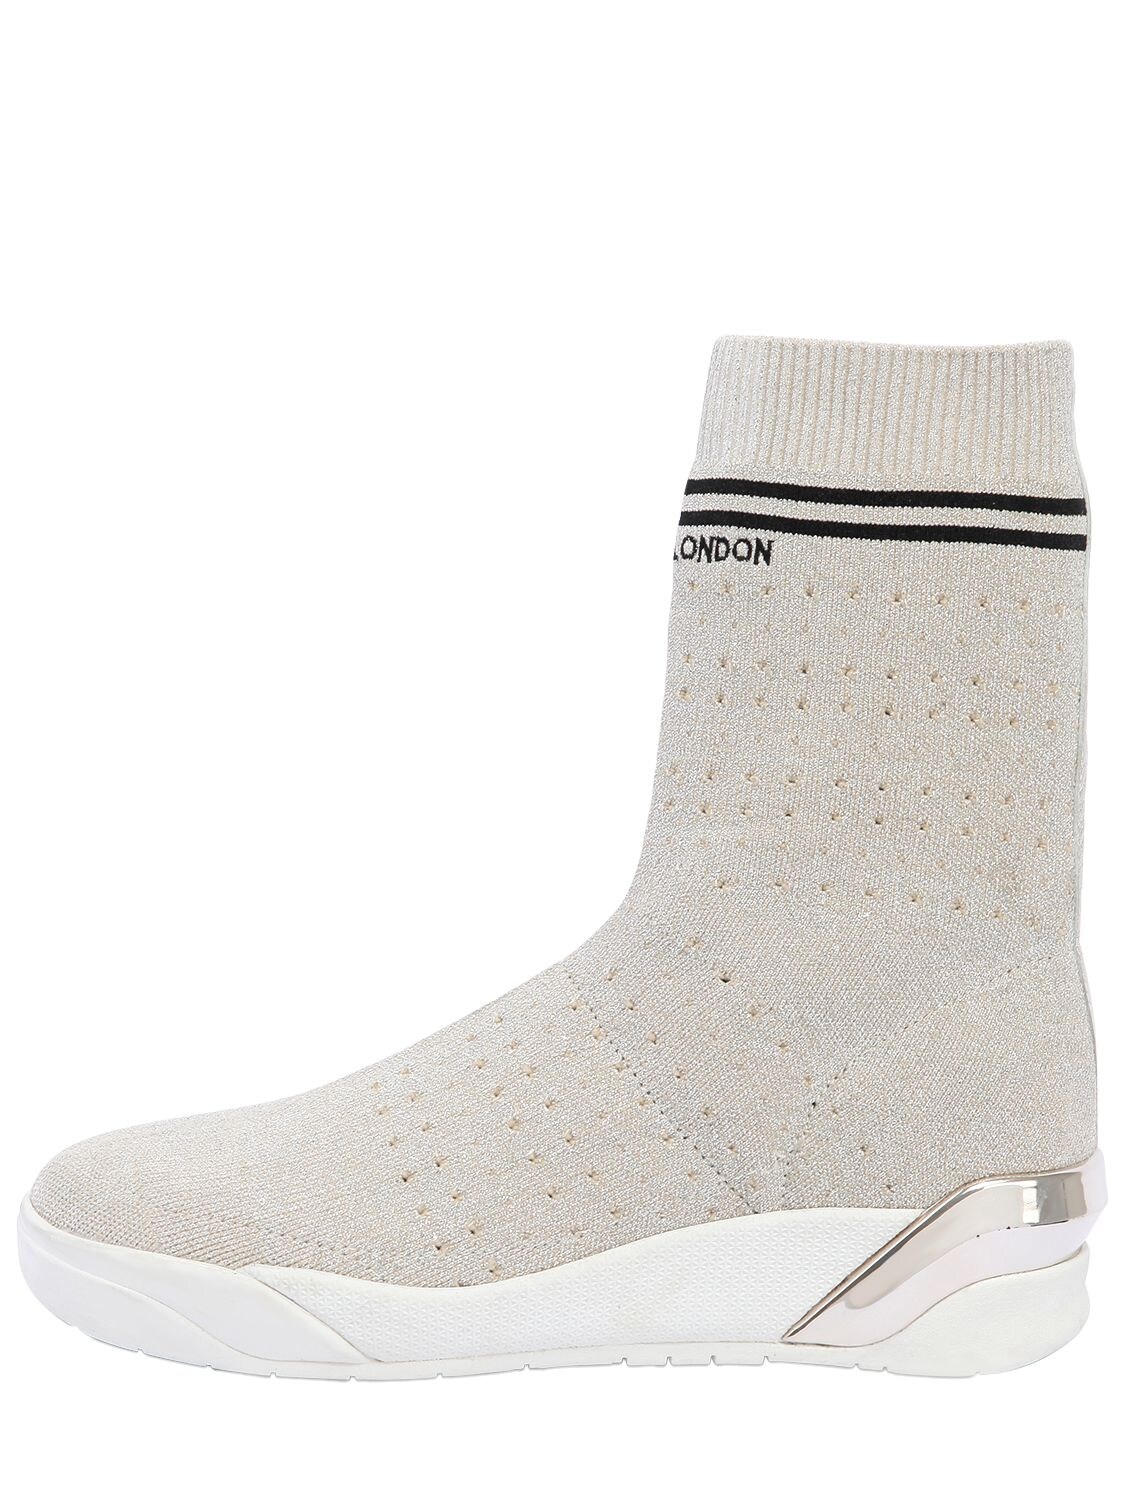 Crime 30mm Stretch Knit Sock Sneakers In Platinum